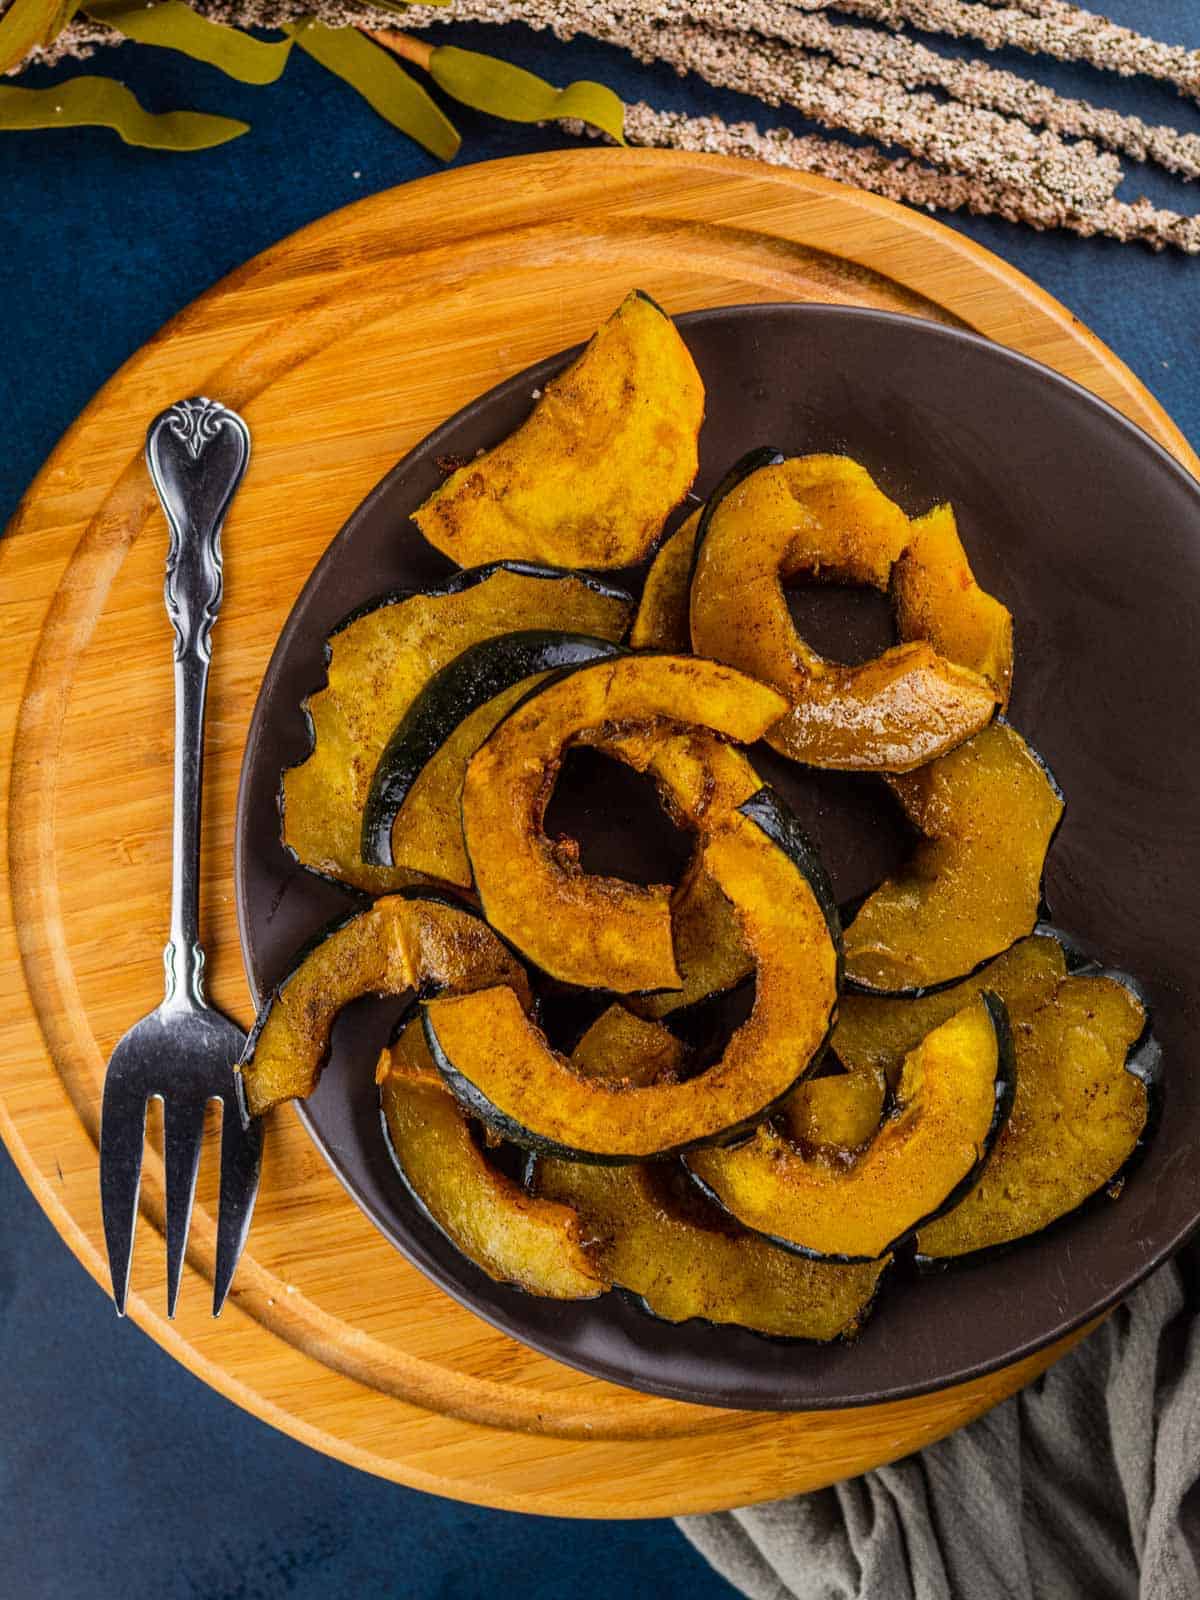 roasted acorn squash slices on a brown plate on a wooden tray with a serving fork